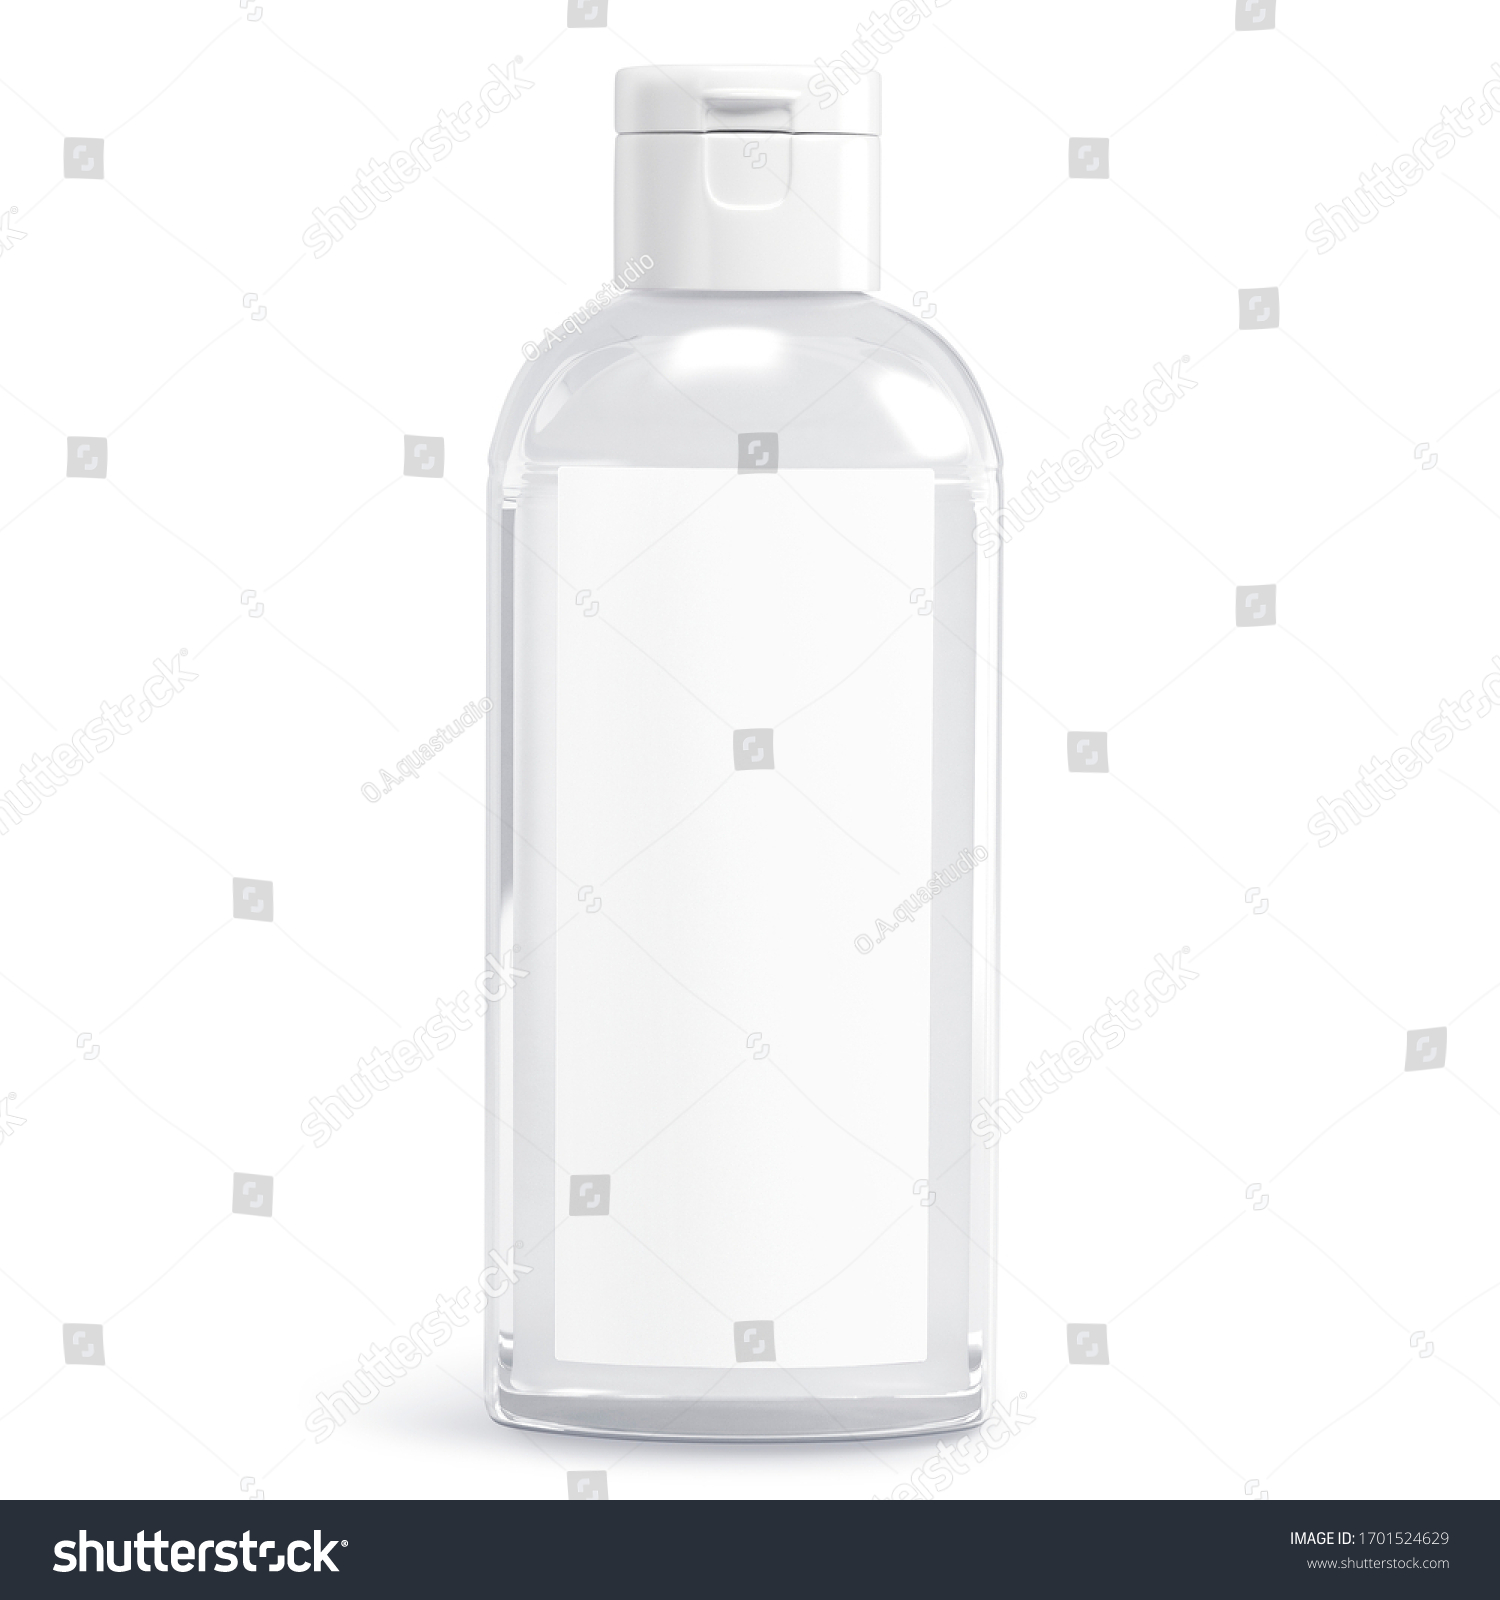 Сlear white cosmetic bottle isolated on white background. Hand sanitizer bottle. Antimicrobial liquid gel. Hand hygiene. Shampoo bottle. 3D rendering #1701524629